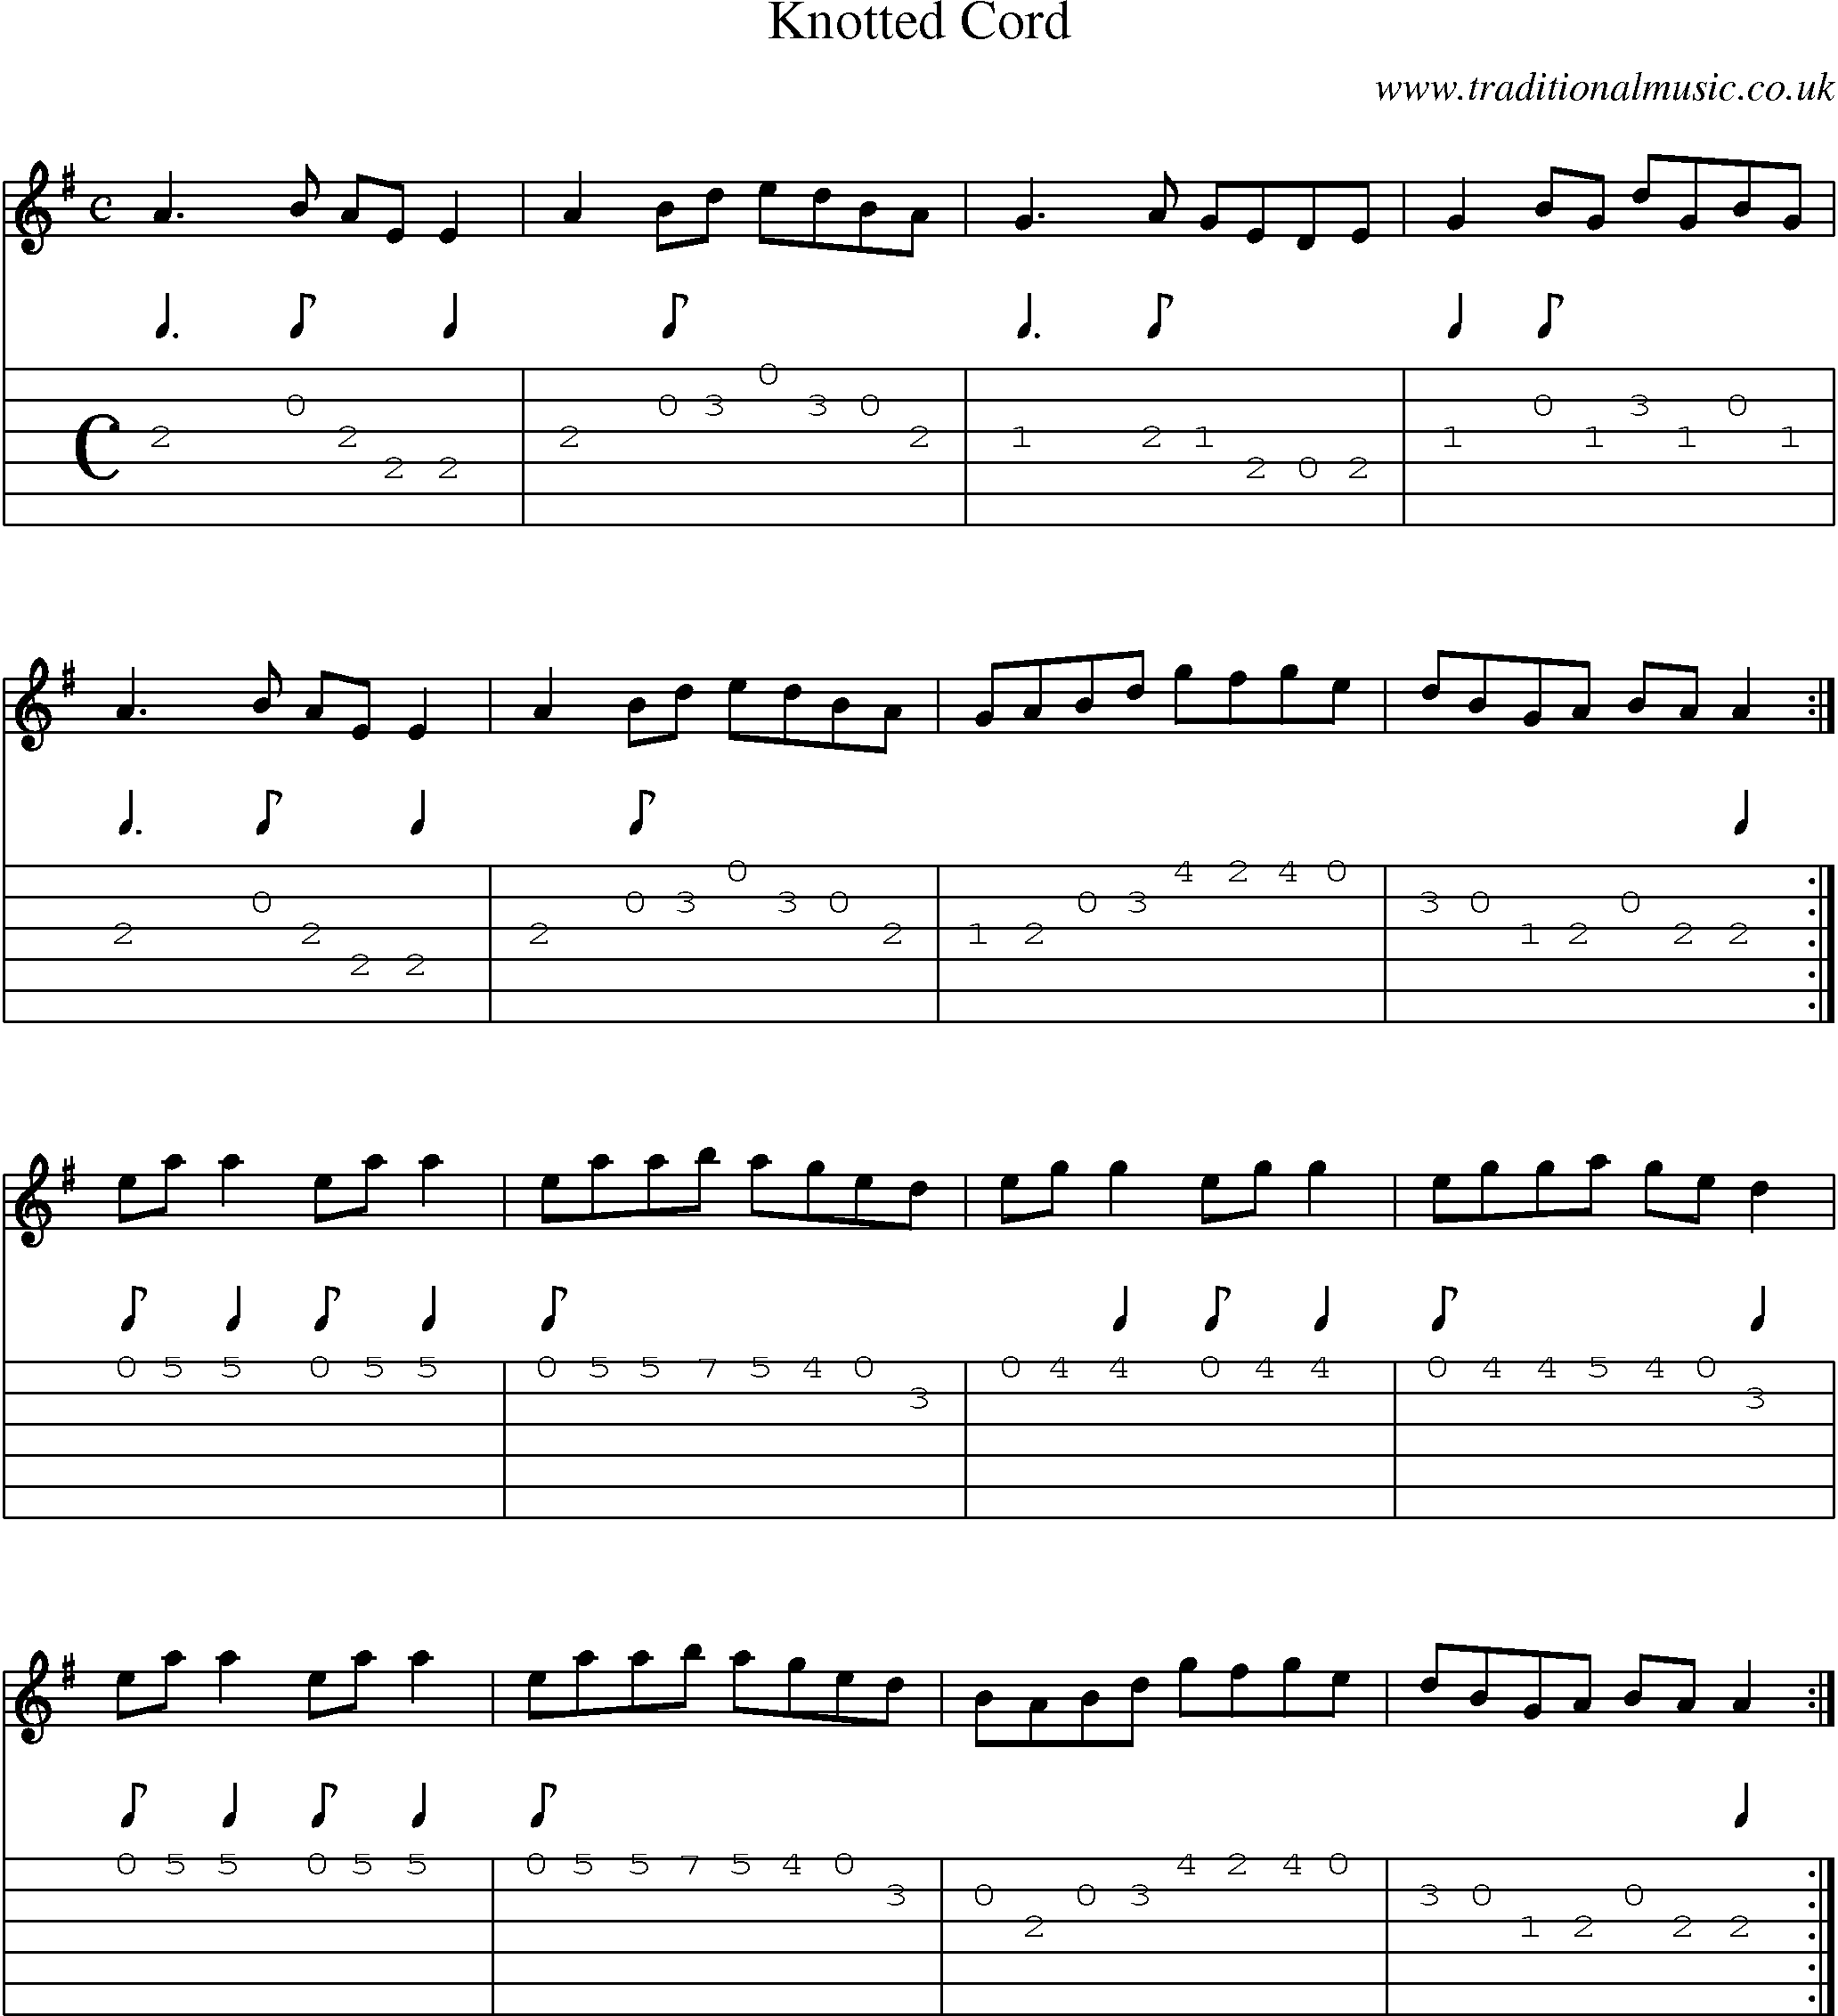 Music Score and Guitar Tabs for Knotted Cord